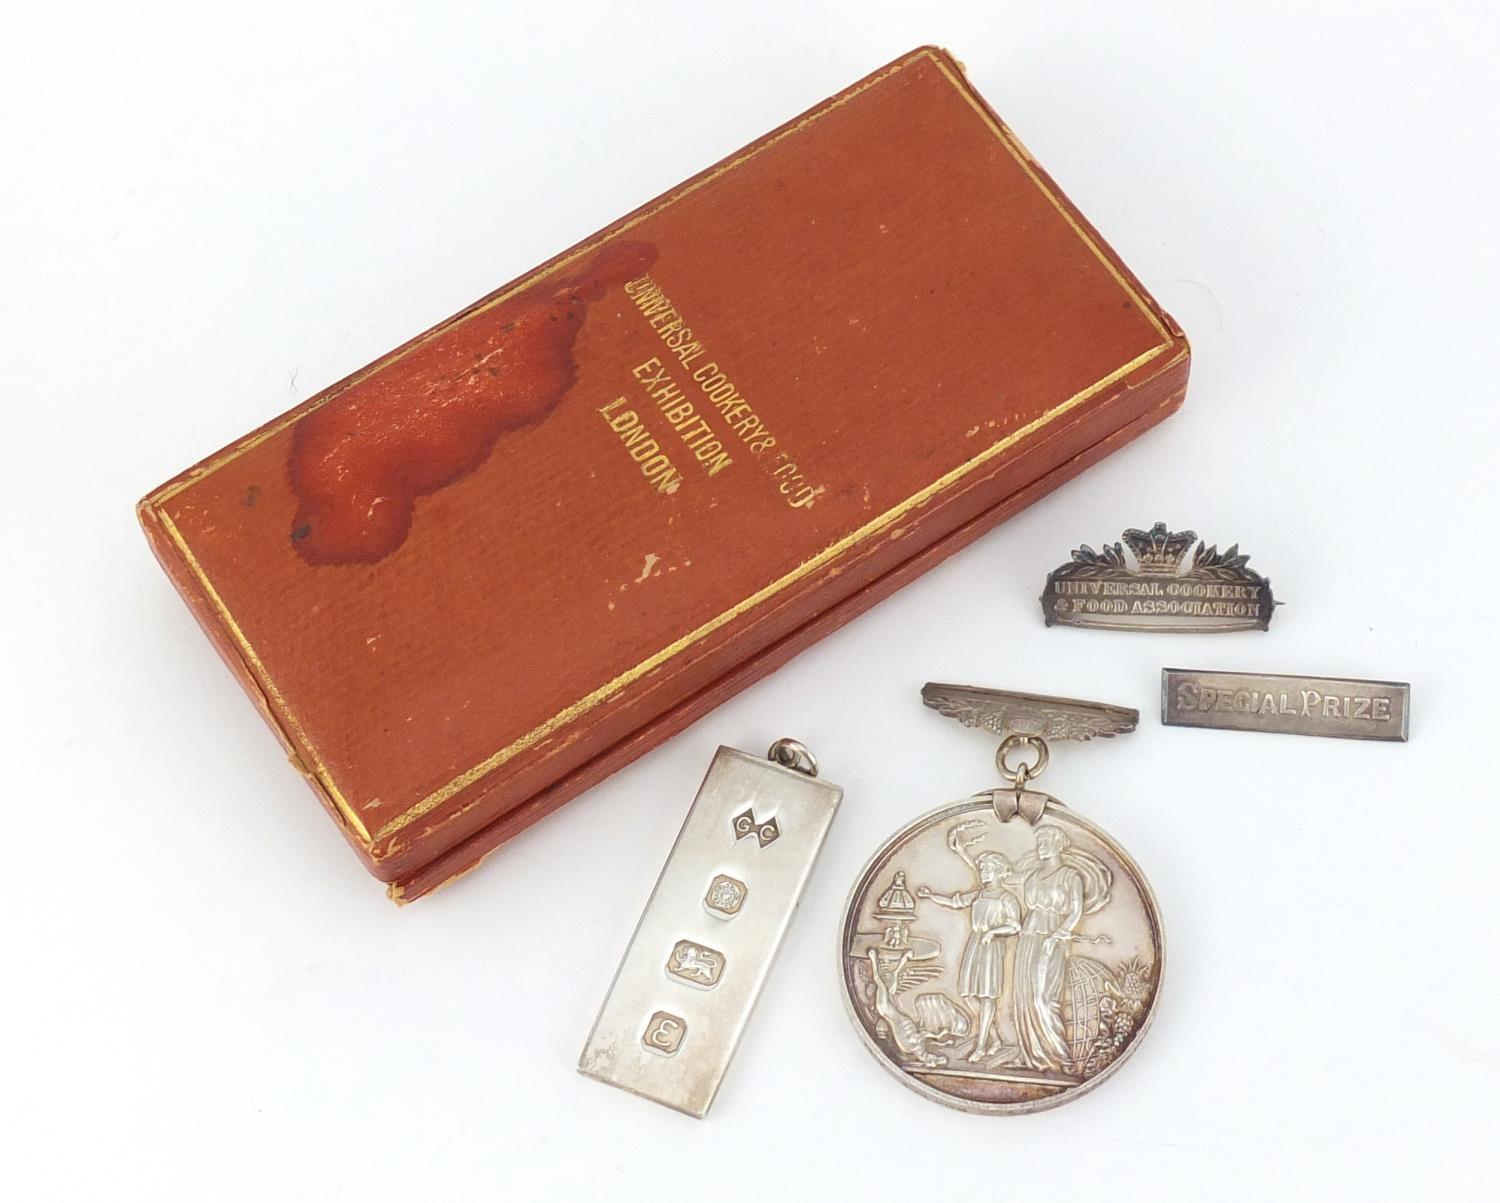 Universal Cookery and Food Exhibition silver special prize medal, with fitted case, engraved